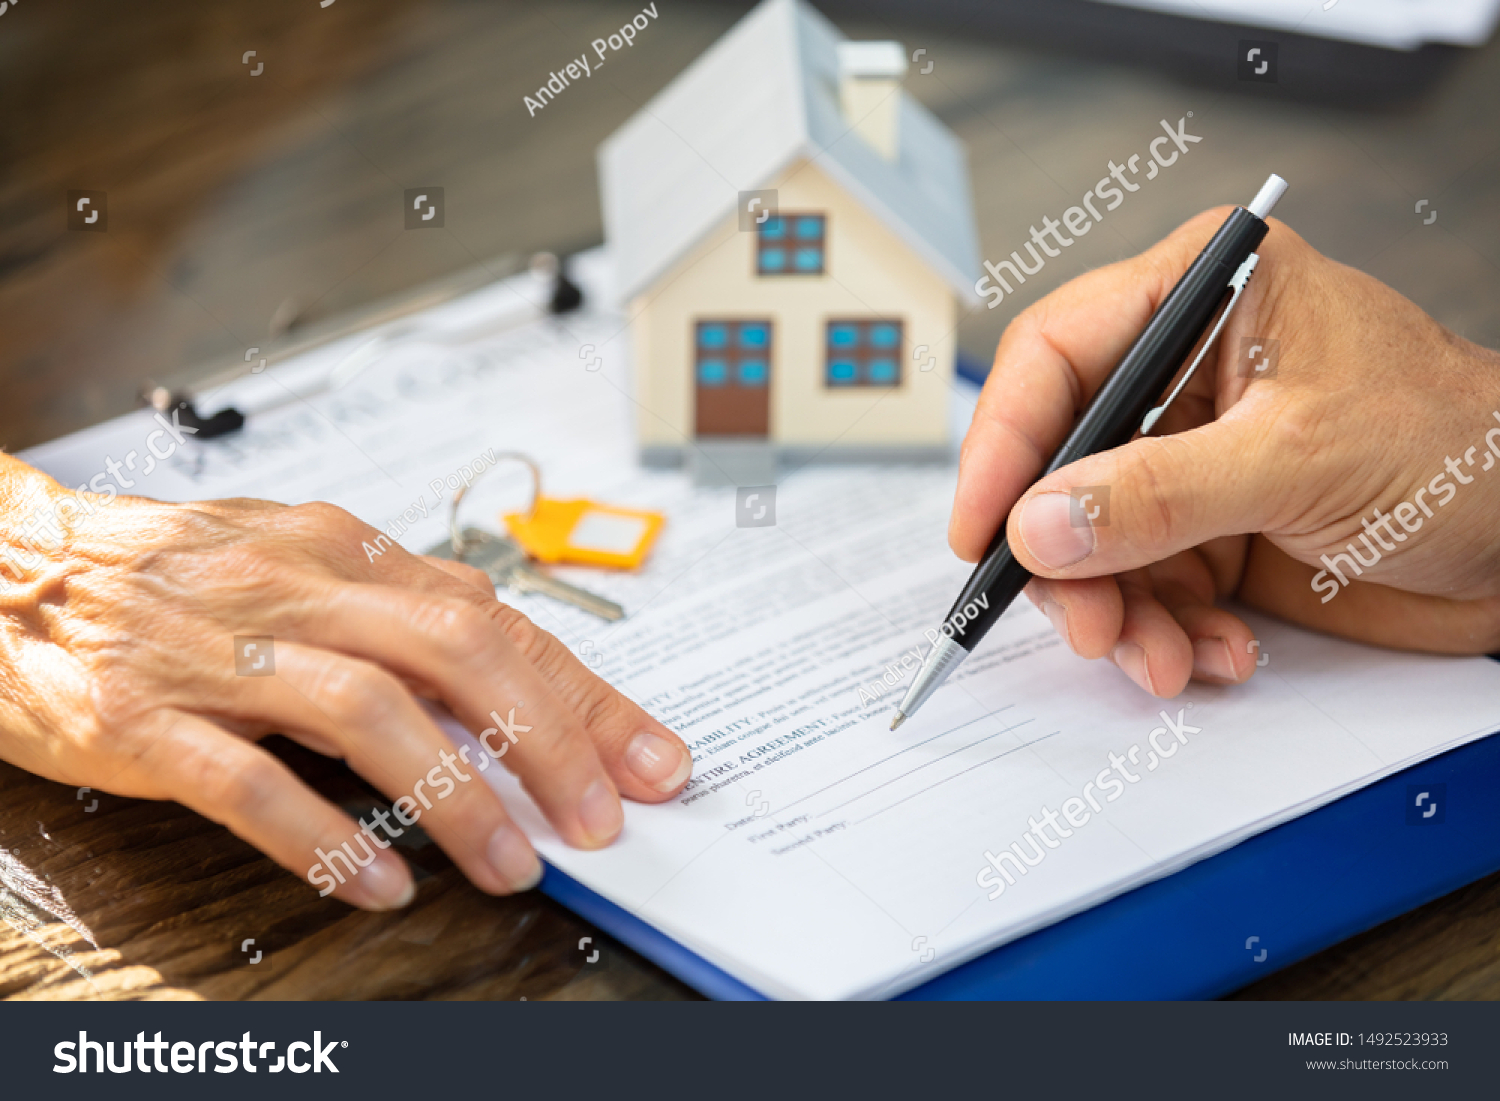 Close-up Of A Real Estate Agent's Hand Helping Client In Filling Contract Form Over Desk #1492523933